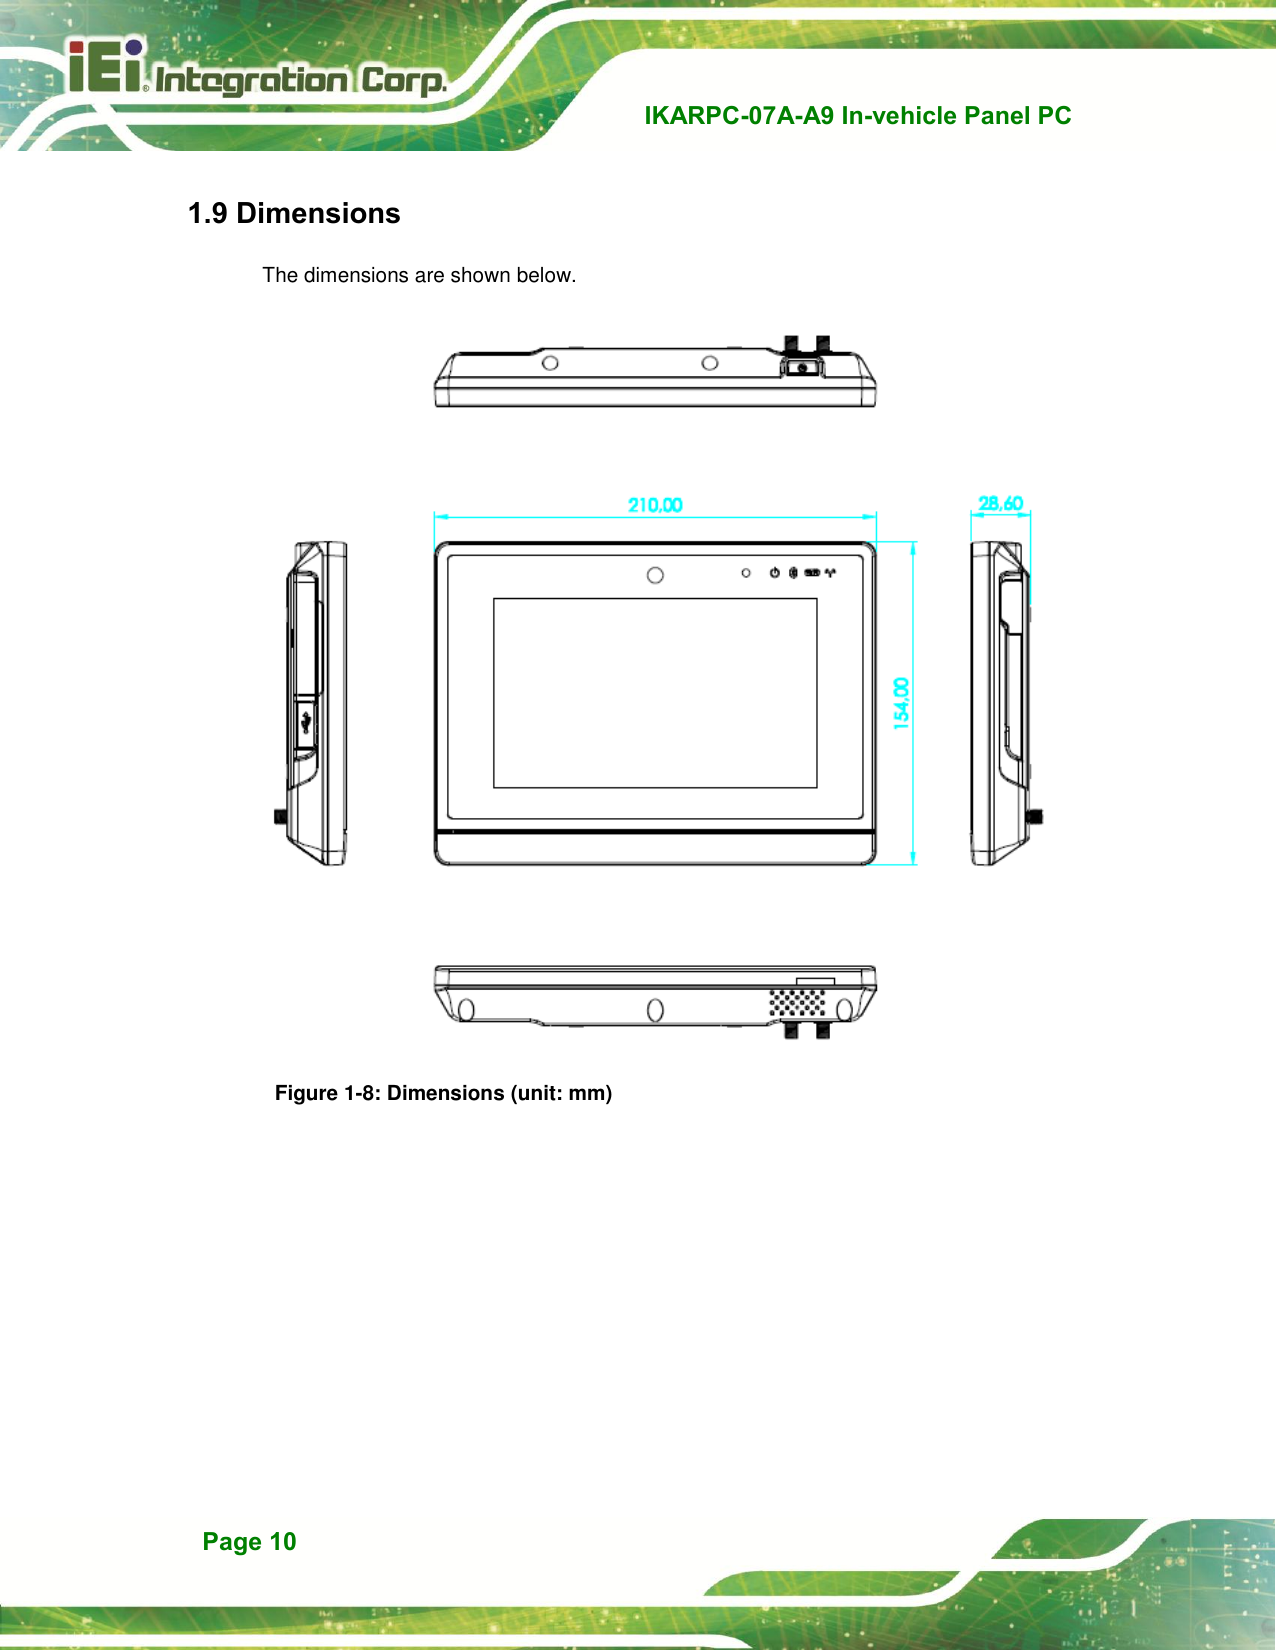   IKARPC-07A-A9 In-vehicle Panel PC  Page 10 1.9 Dimensions The dimensions are shown below.  Figure 1-8: Dimensions (unit: mm)  